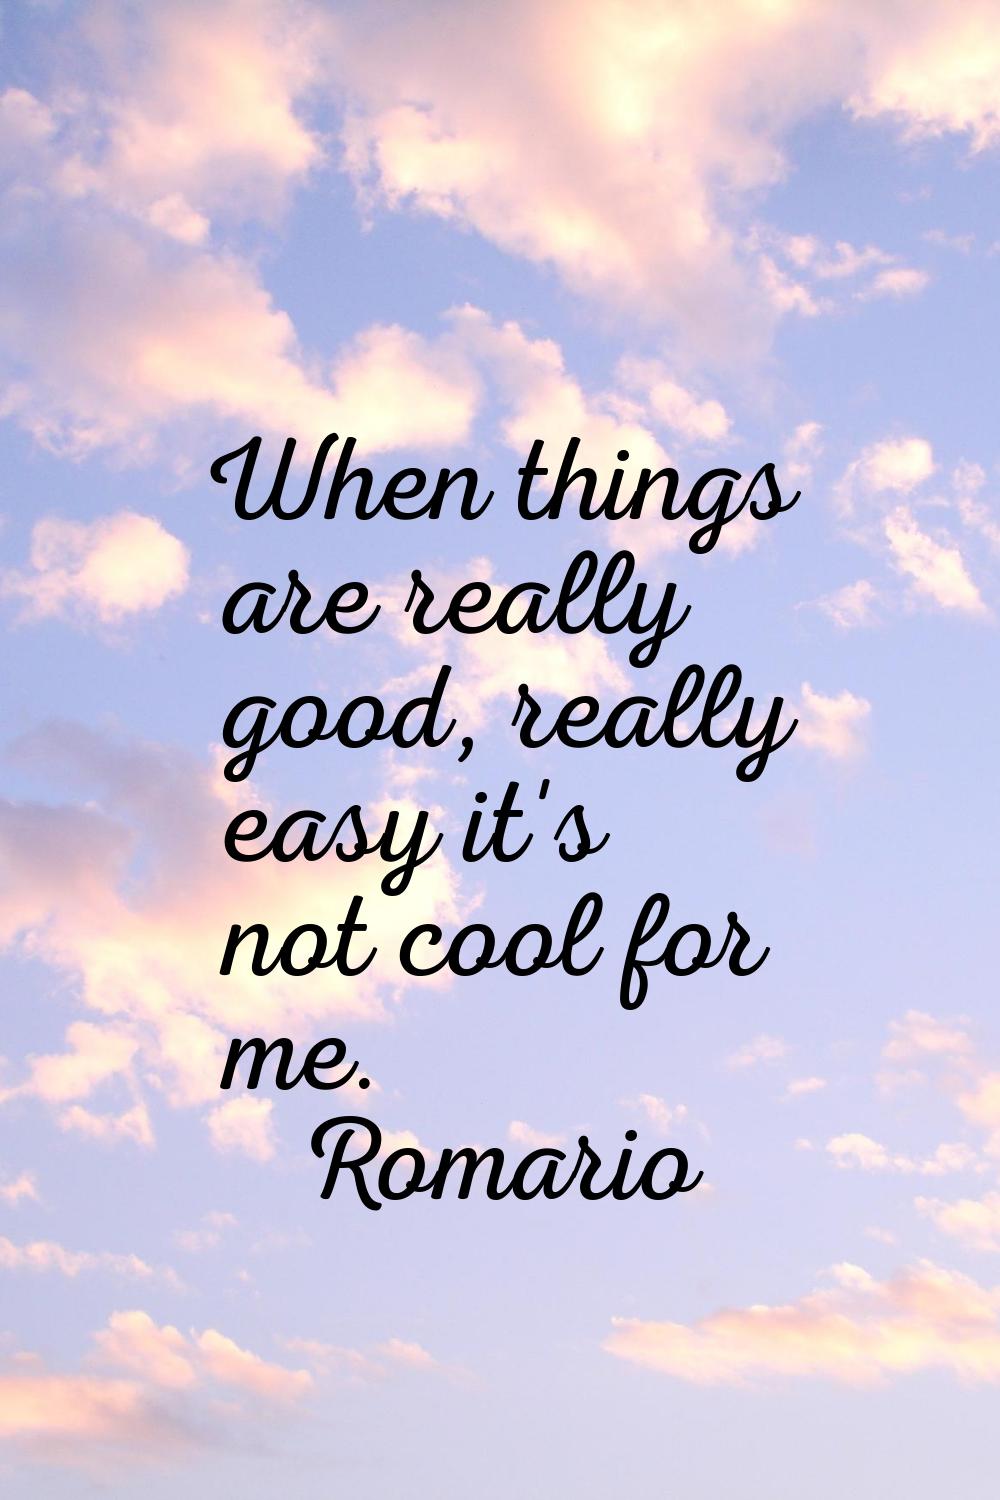 When things are really good, really easy it's not cool for me.